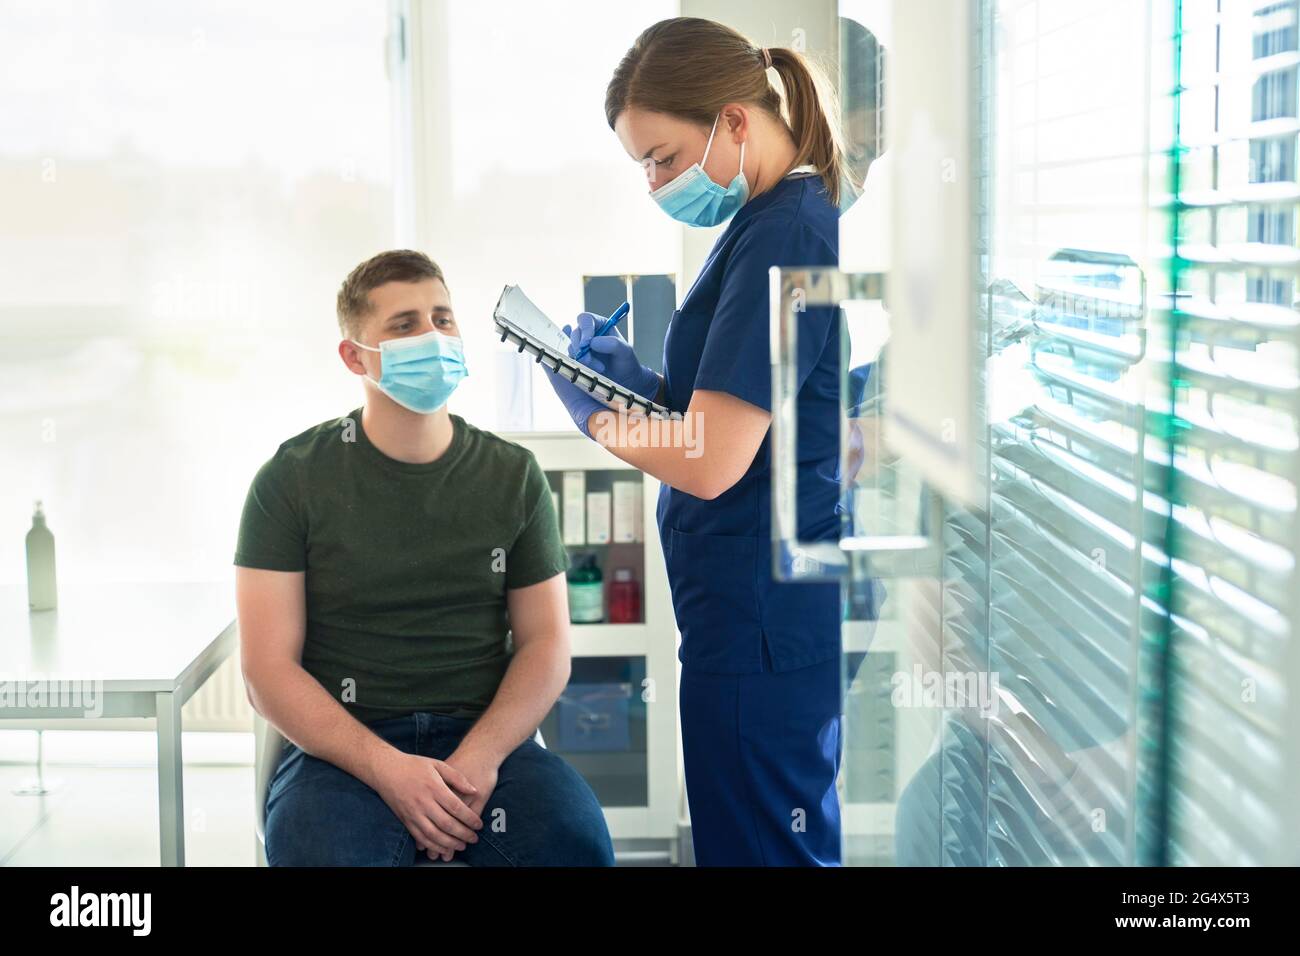 Doctor taking patient's interview before giving COVID-19 vaccine at vaccination center Stock Photo